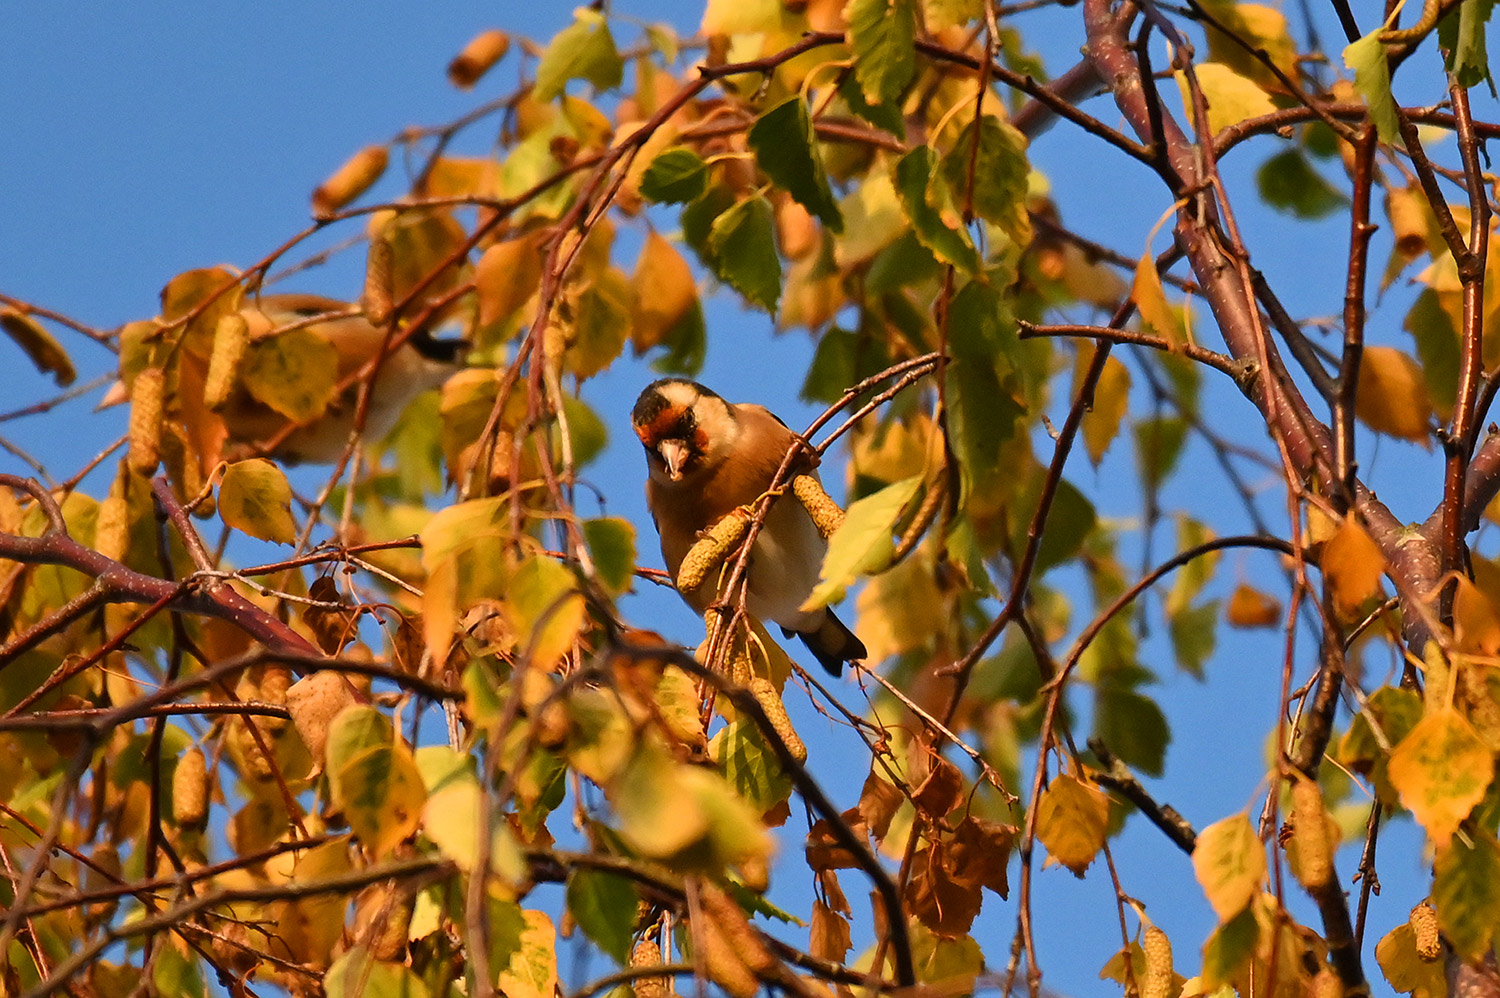 Picture of a Goldfinch in some autumn leaves under a blue sky